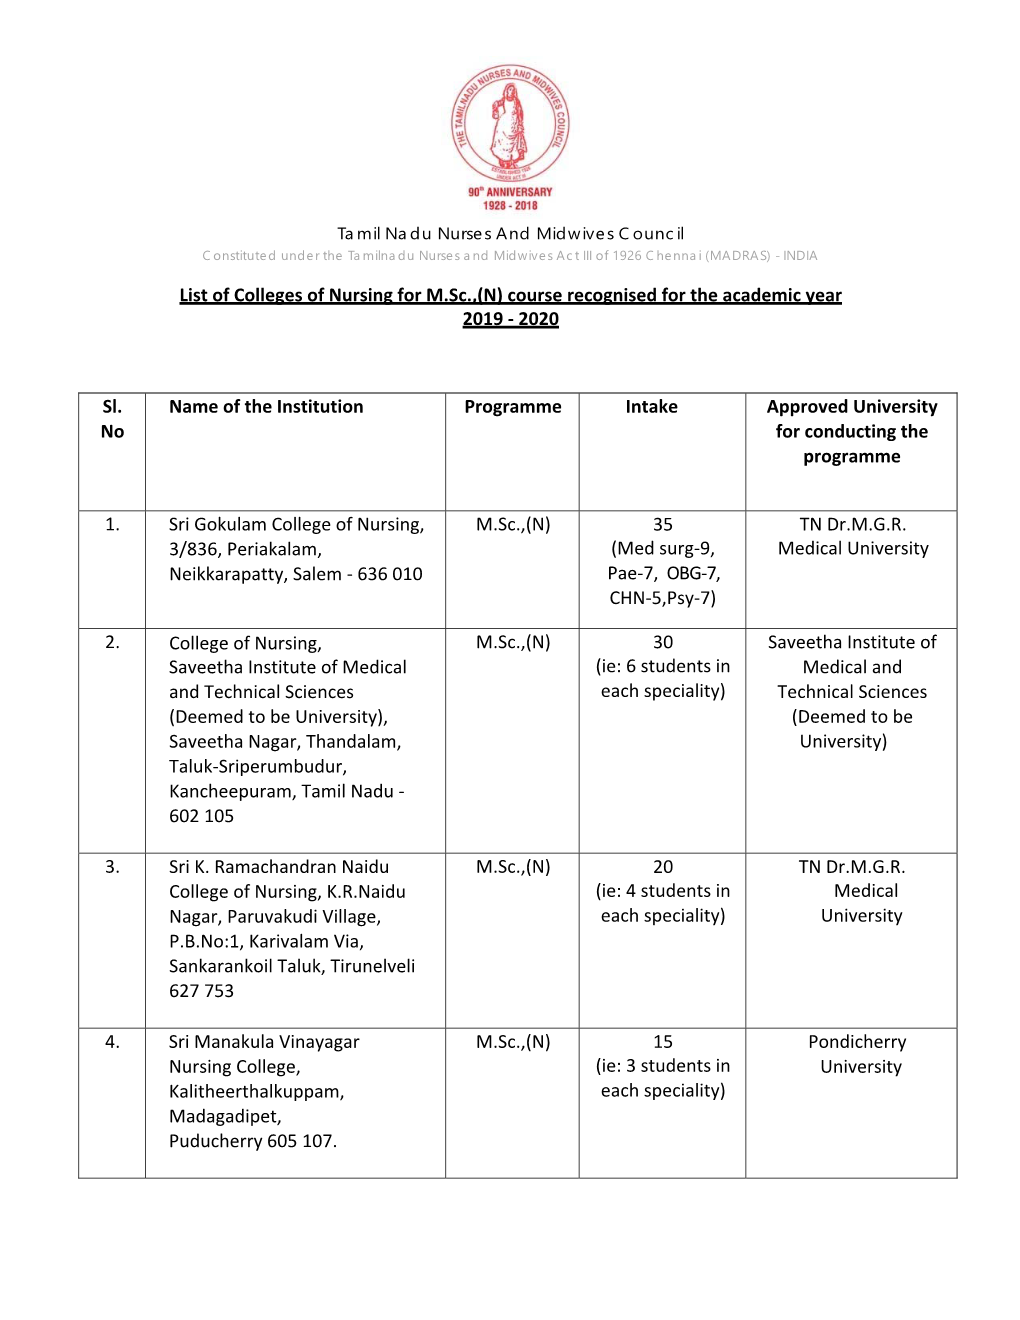 List of Colleges of Nursing for M.Sc.,(N) Course Recognised for the Academic Year 2019 - 2020